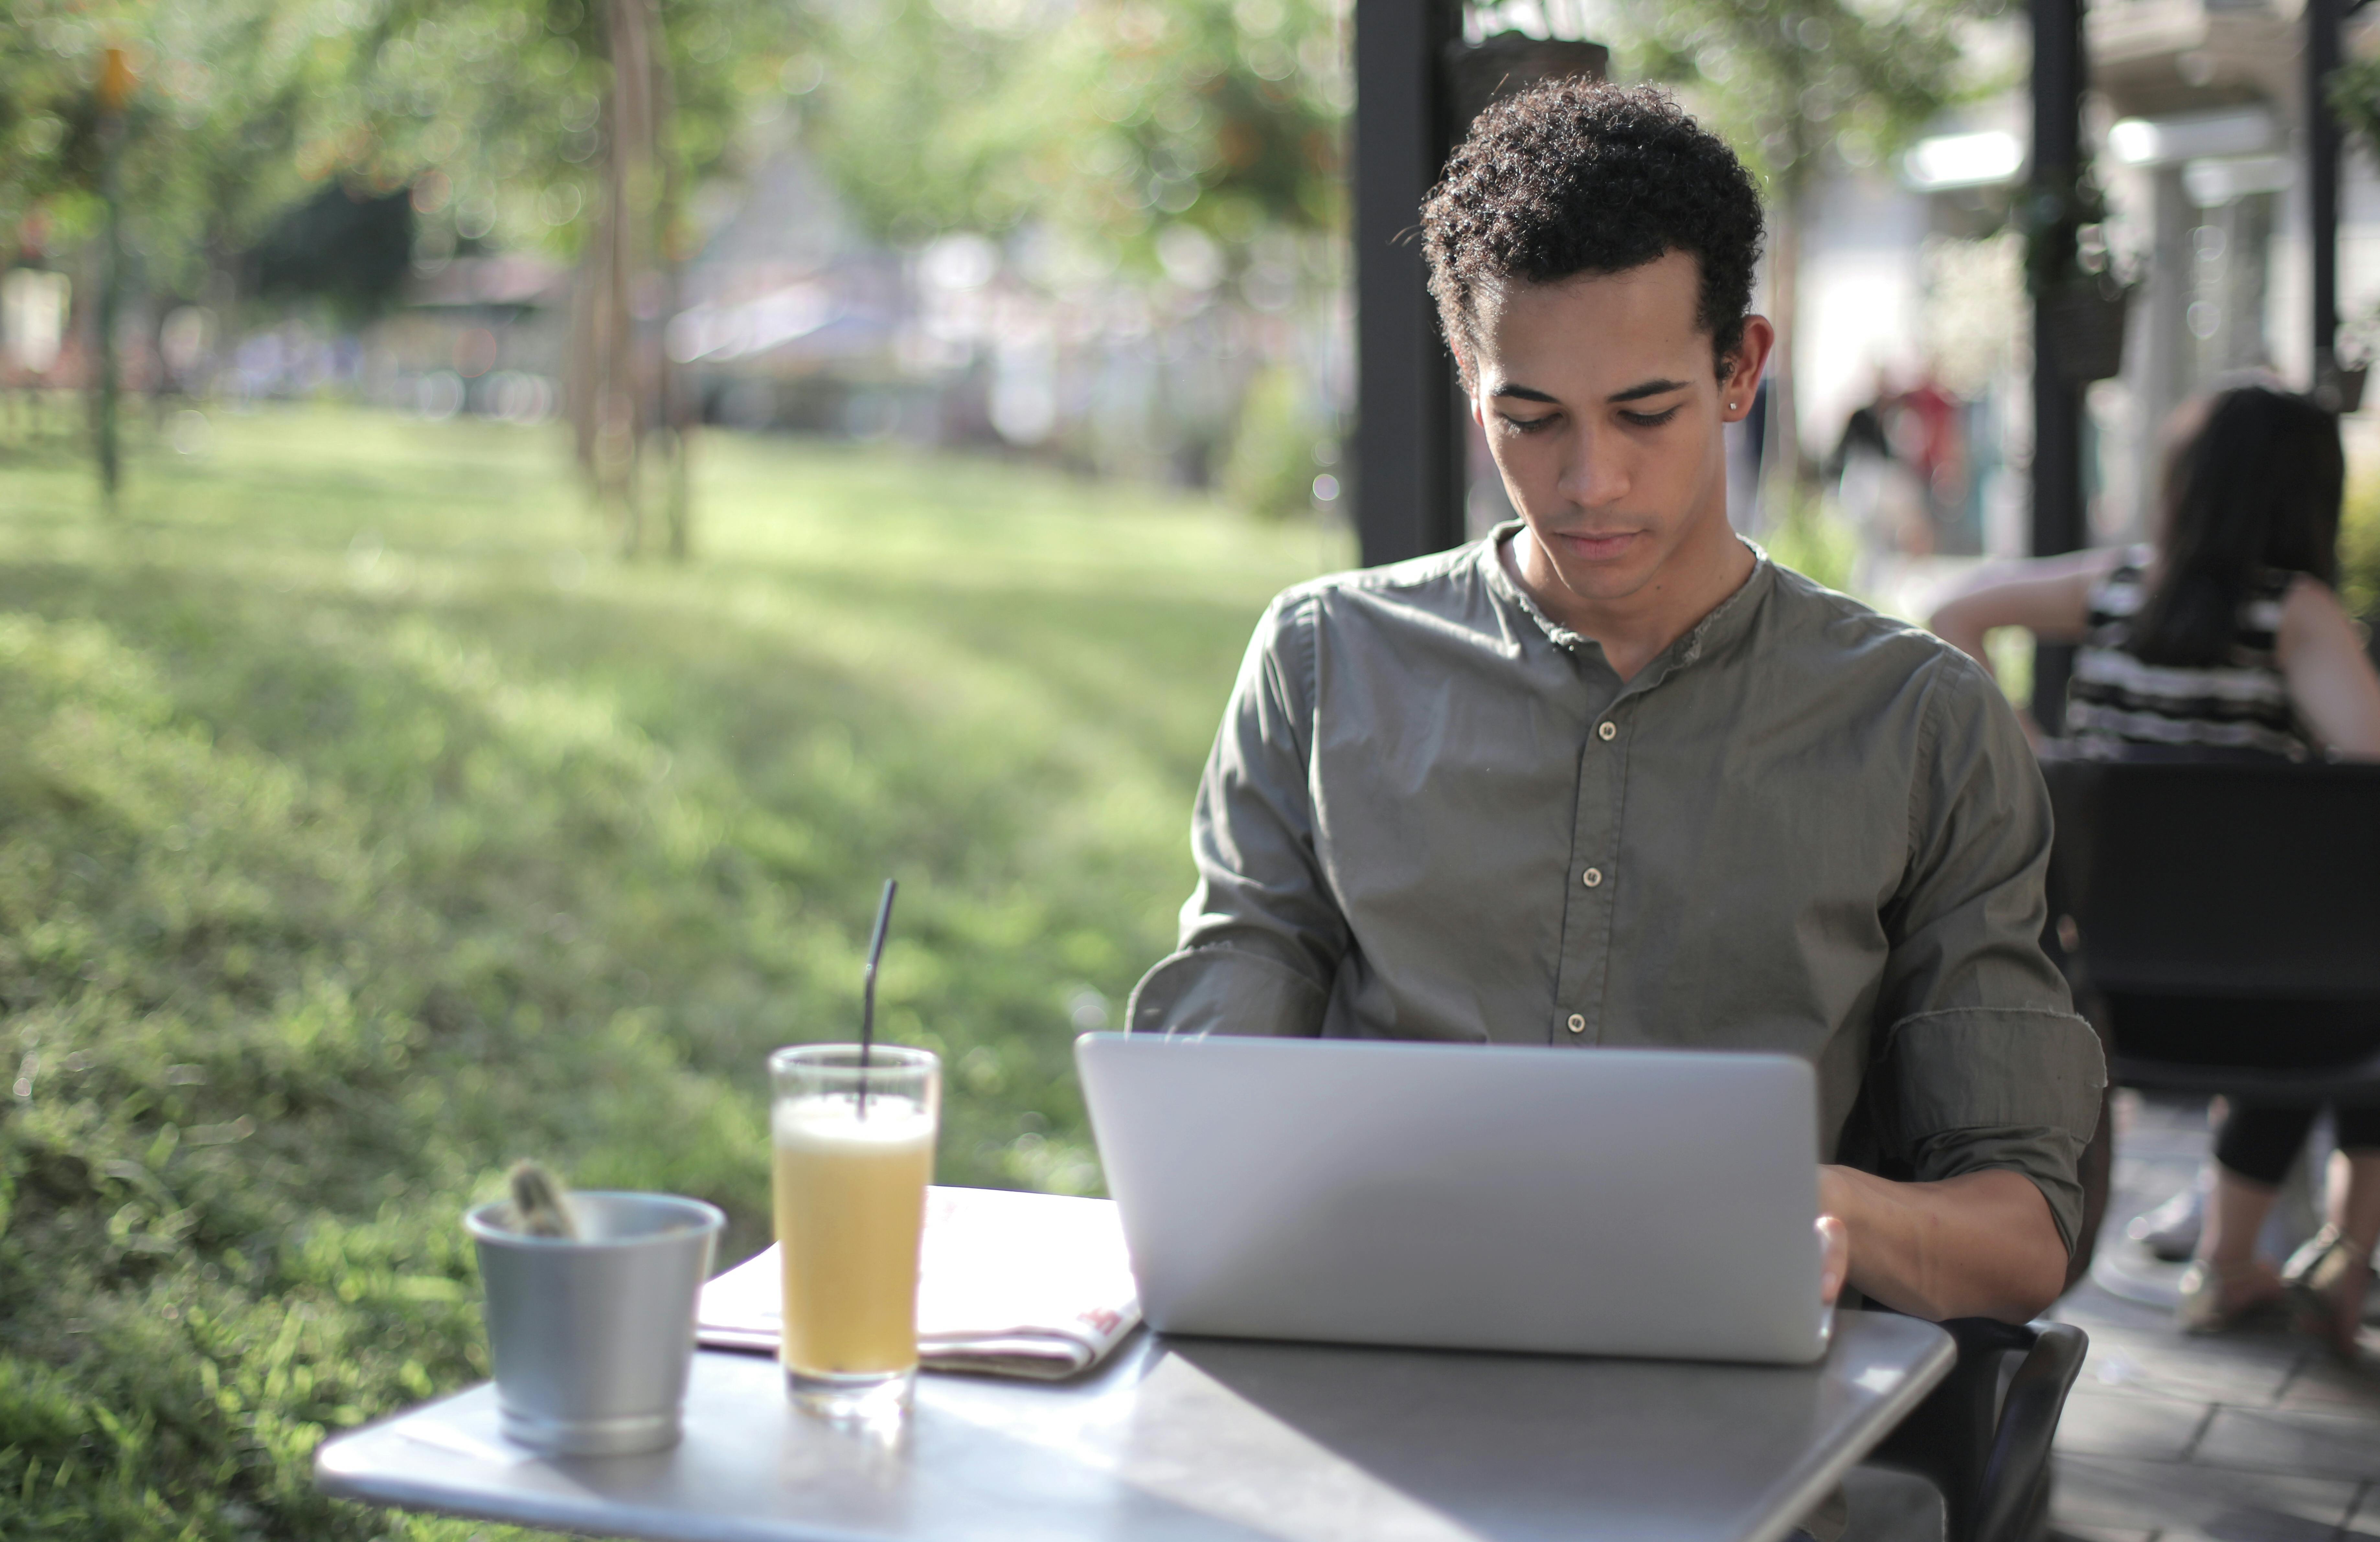 male law student at an outdoor cafe wearing a law school attire of grey button-down shirt, sleeves folded at the elbows